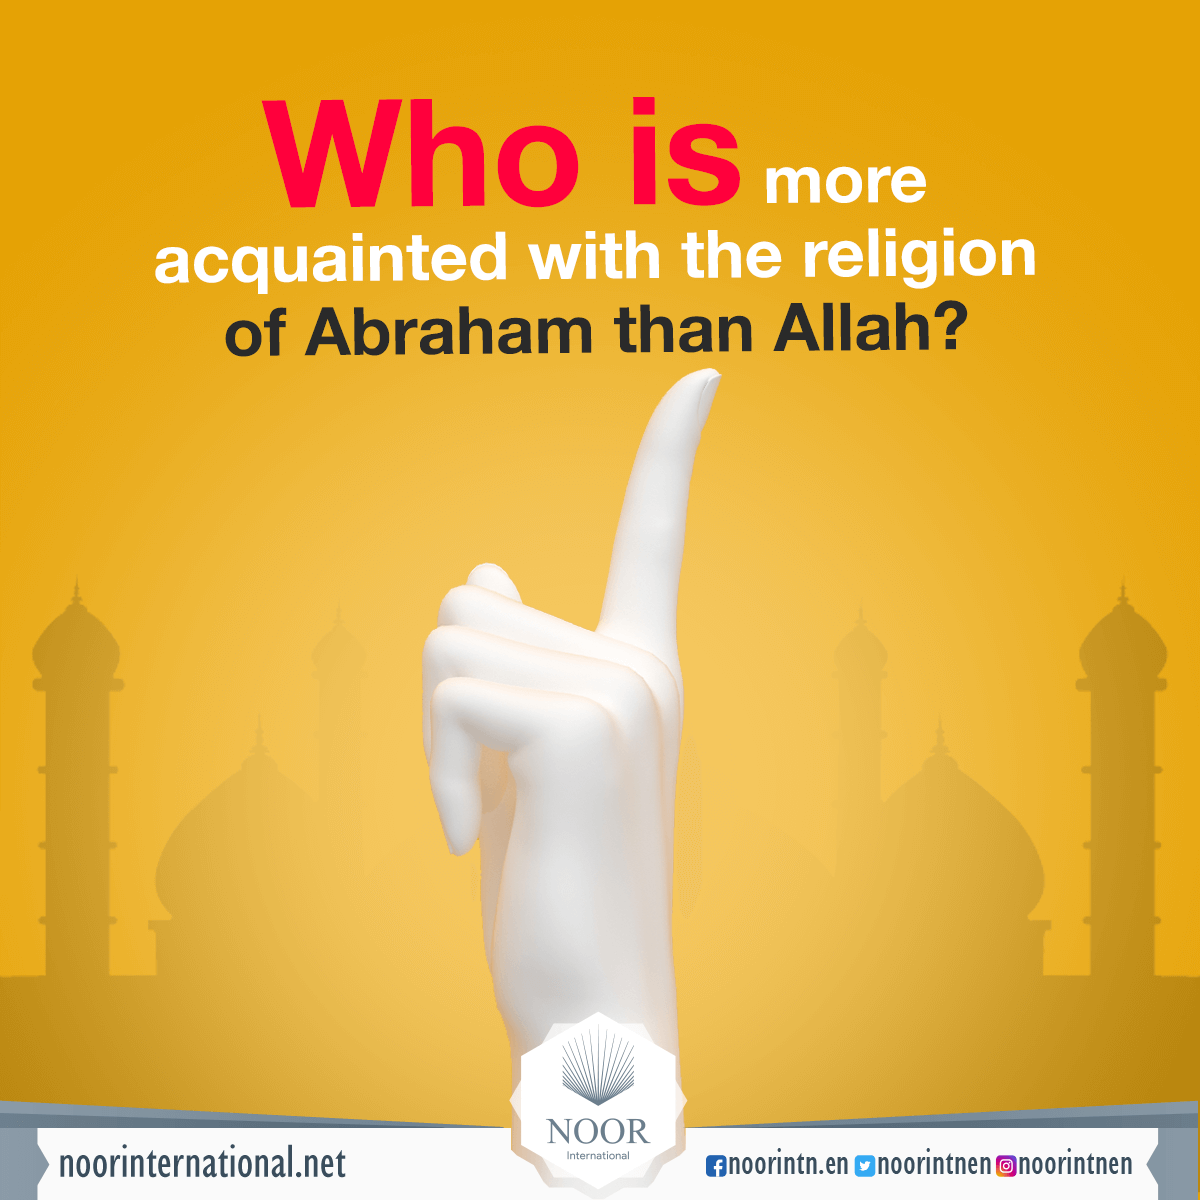 Who is more acquainted with the religion of Abraham than Allah?